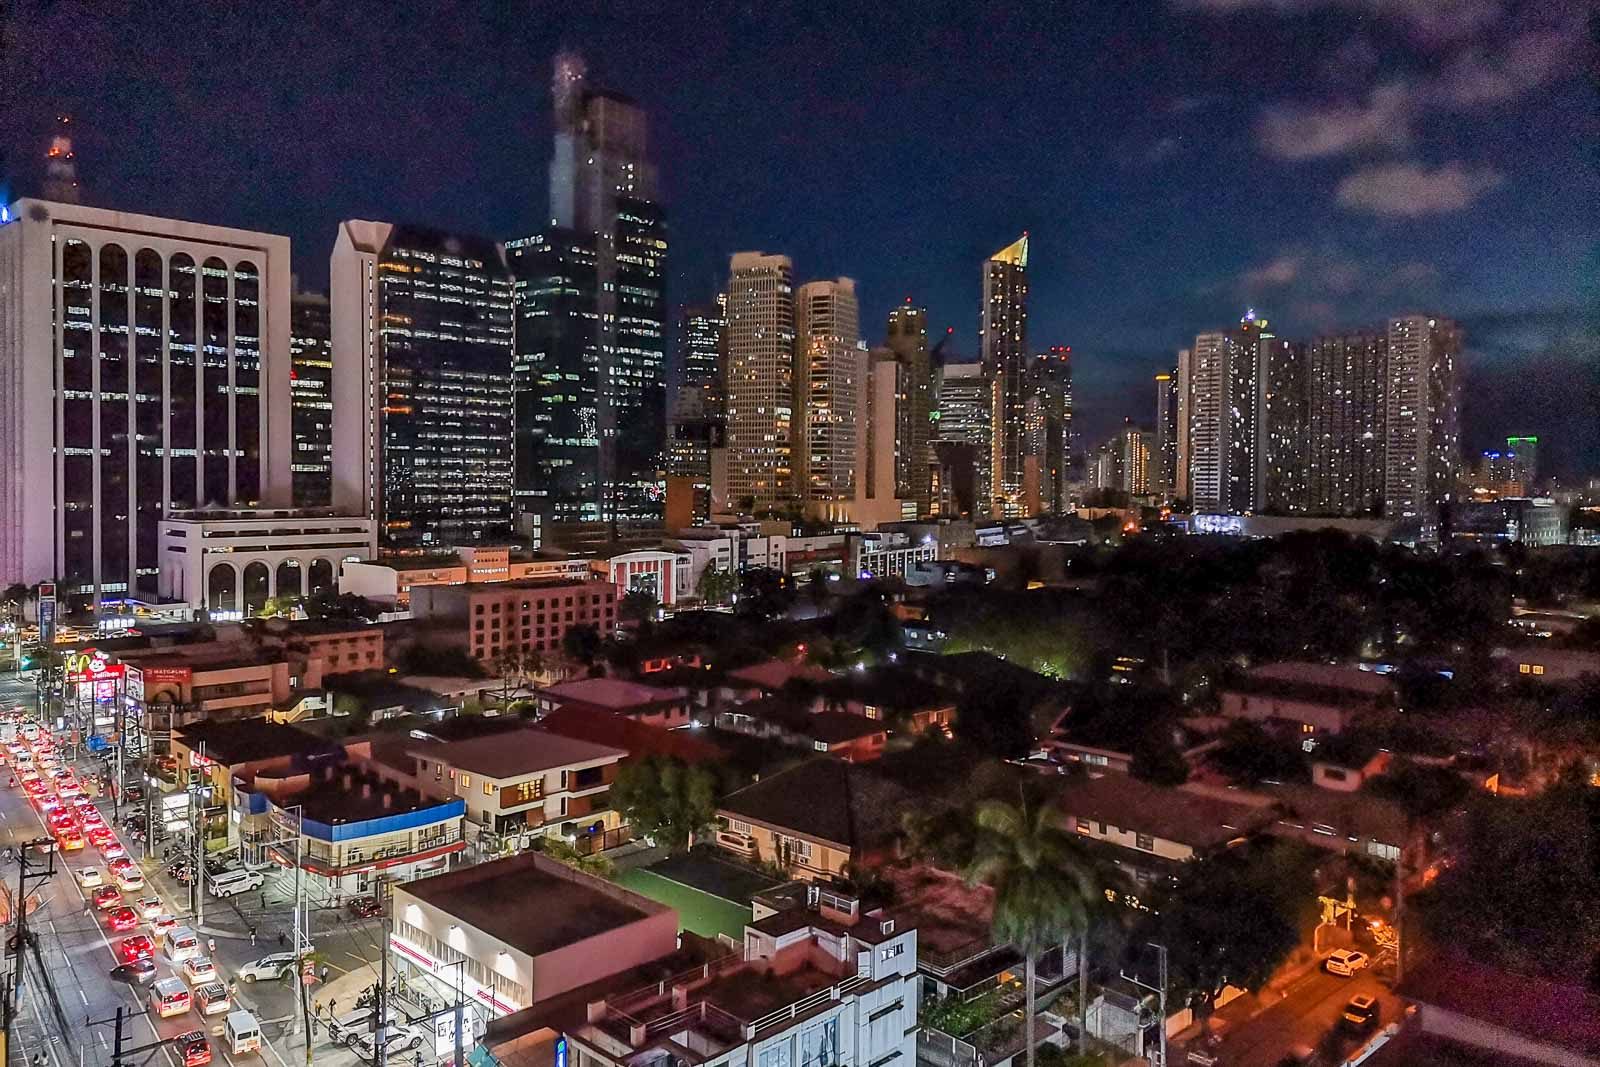 Philippines hits 6.4% GDP growth in Q1 2023 despite inflation pressures